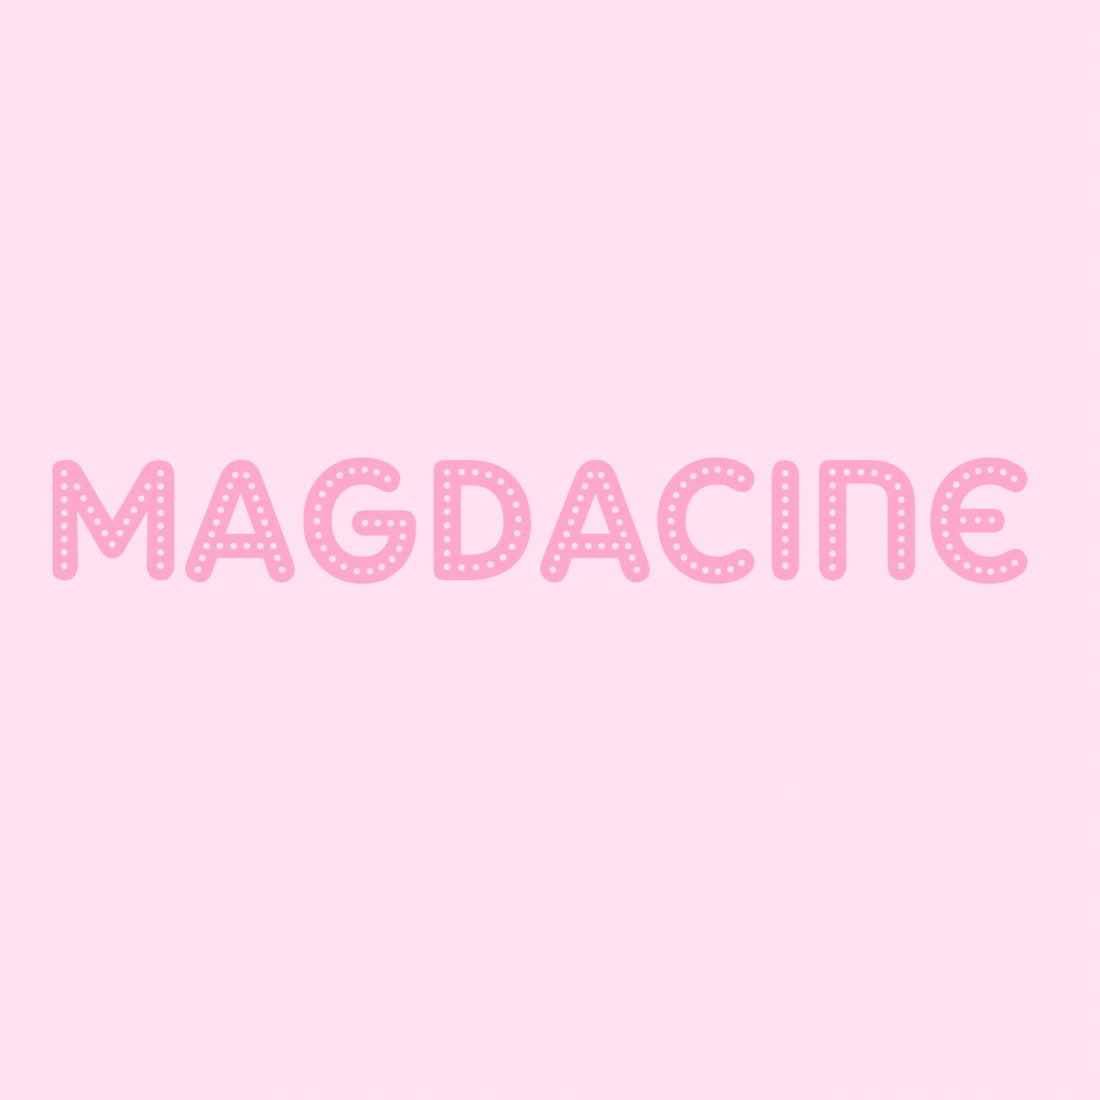 The It Girl 4-minute guided affirmation meditation by Magdalena🤍☁️